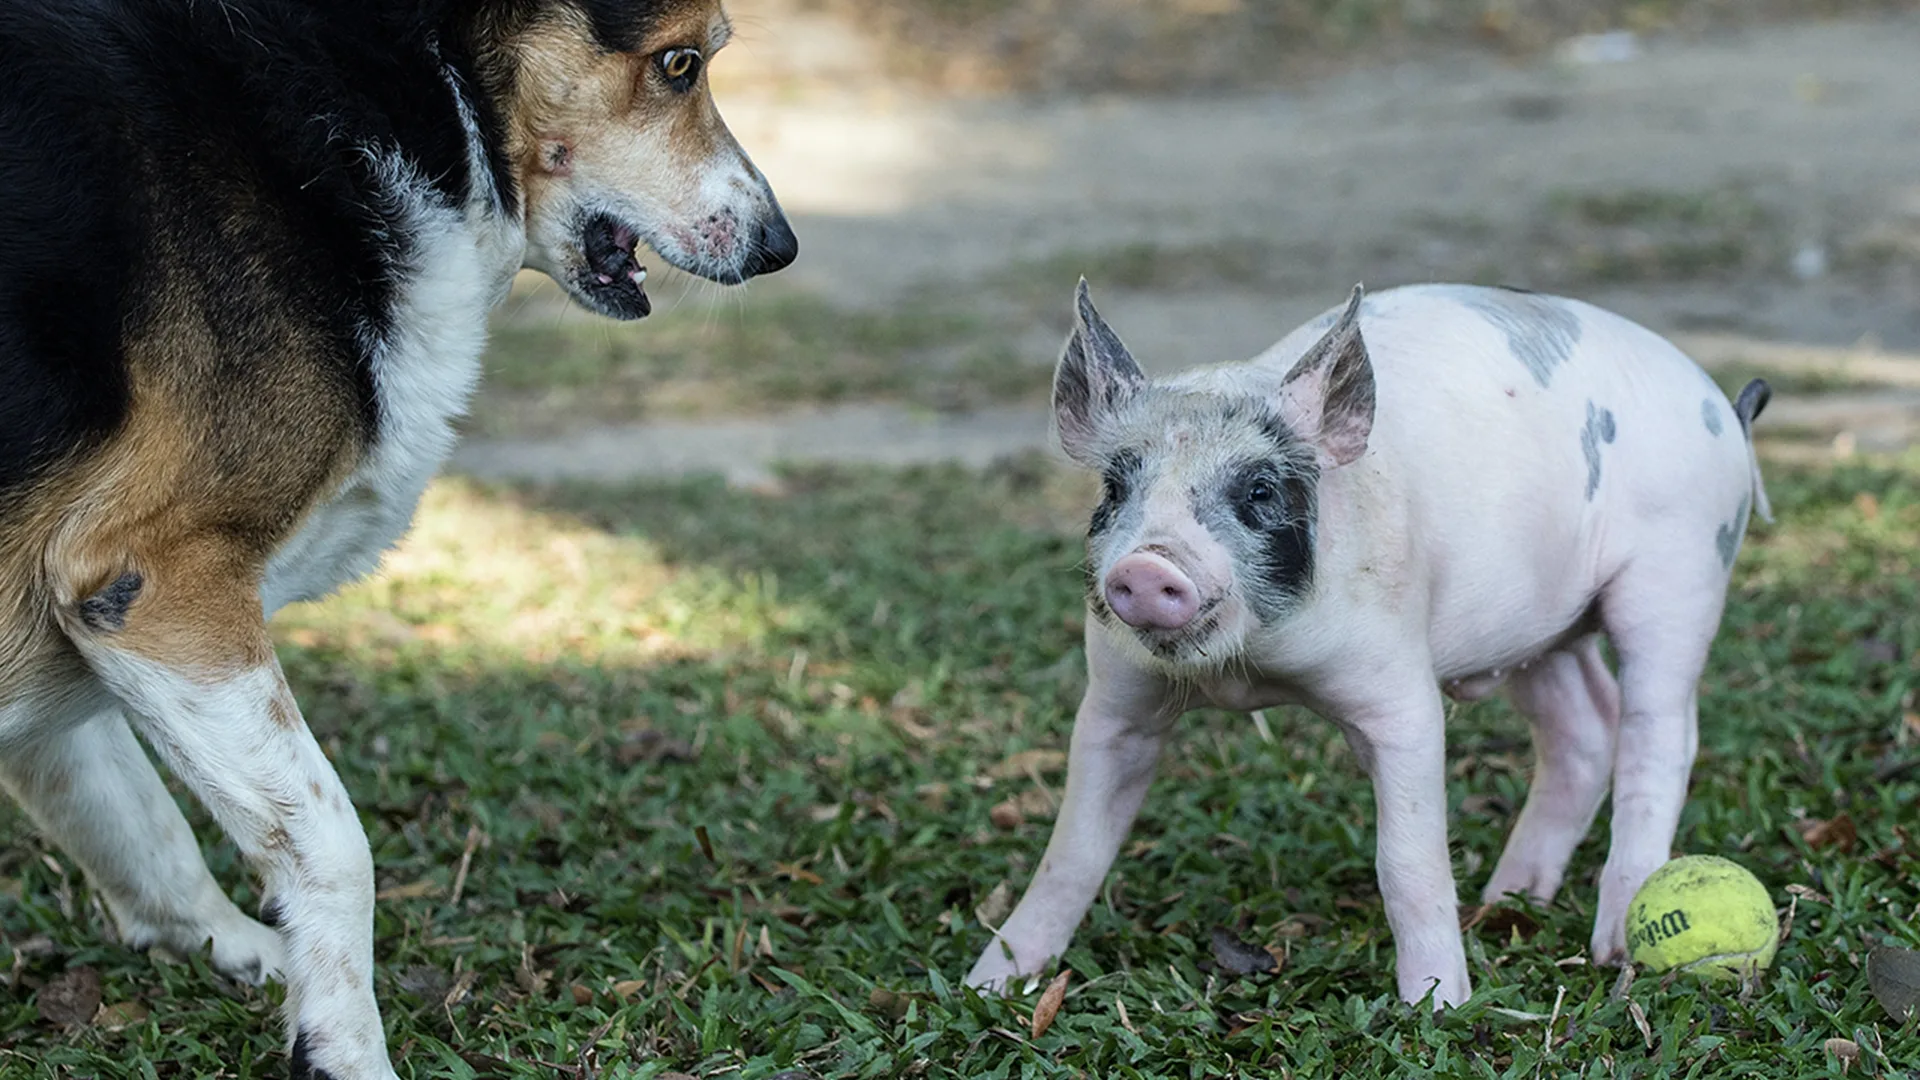 A dog and pig playing ball together on a lawn